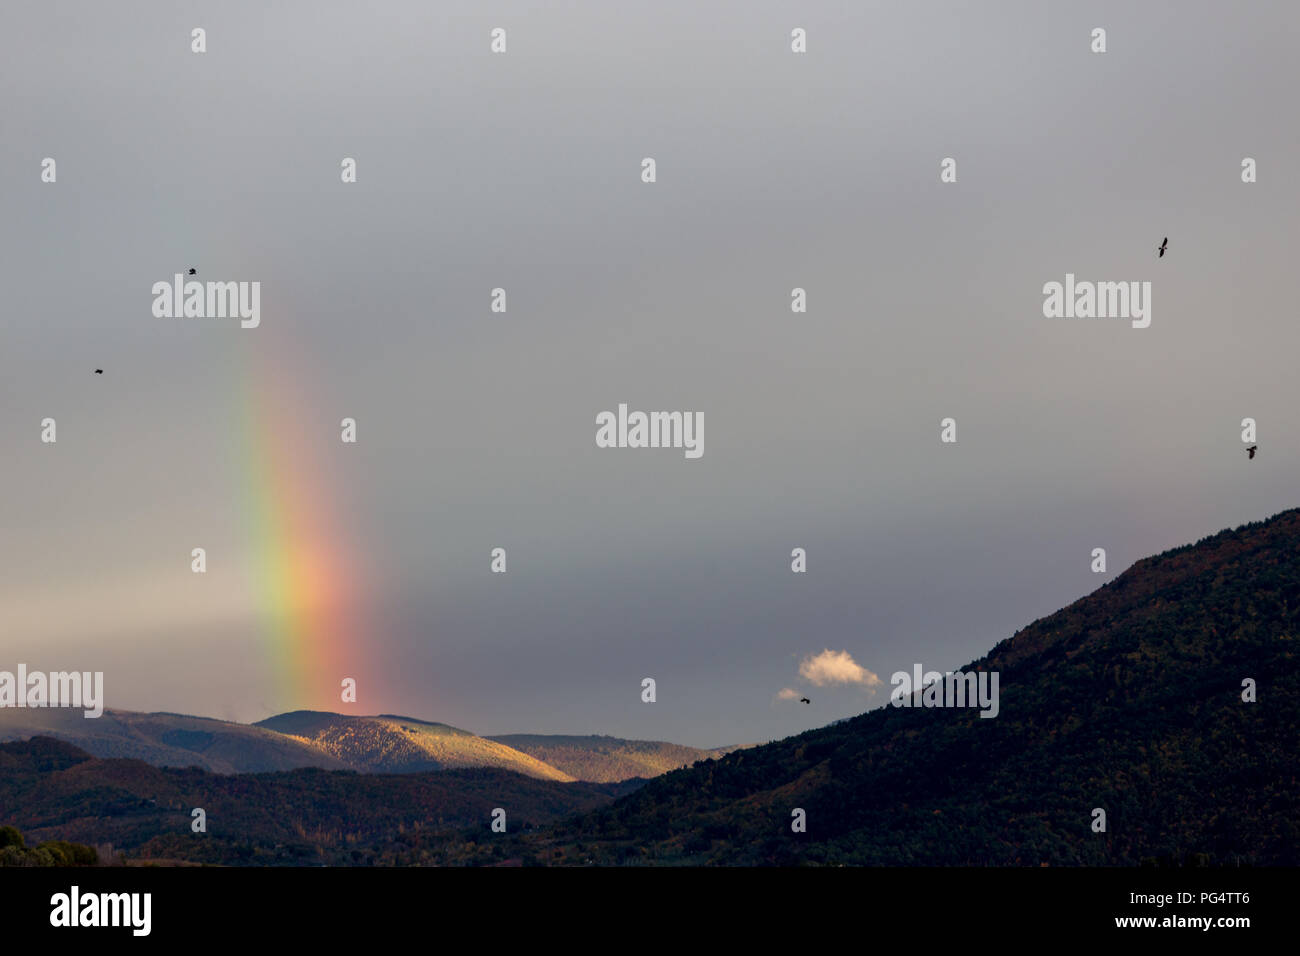 Beautiful and surreal view of part of a rainbow over some hills with birds flying Stock Photo